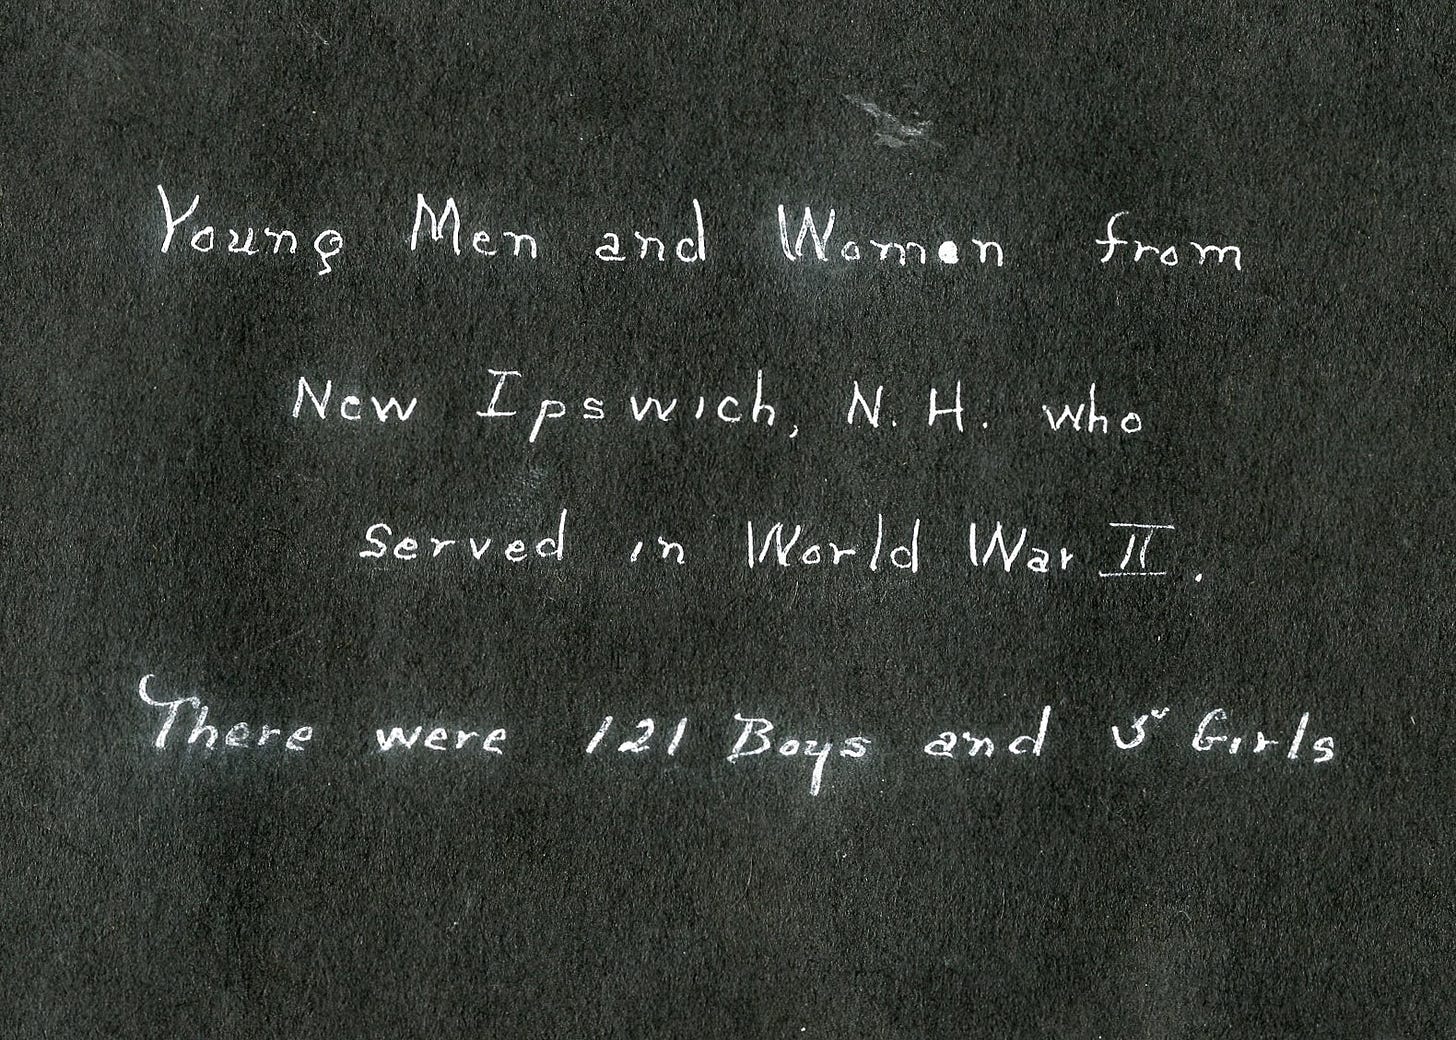 Text from WWII photo album